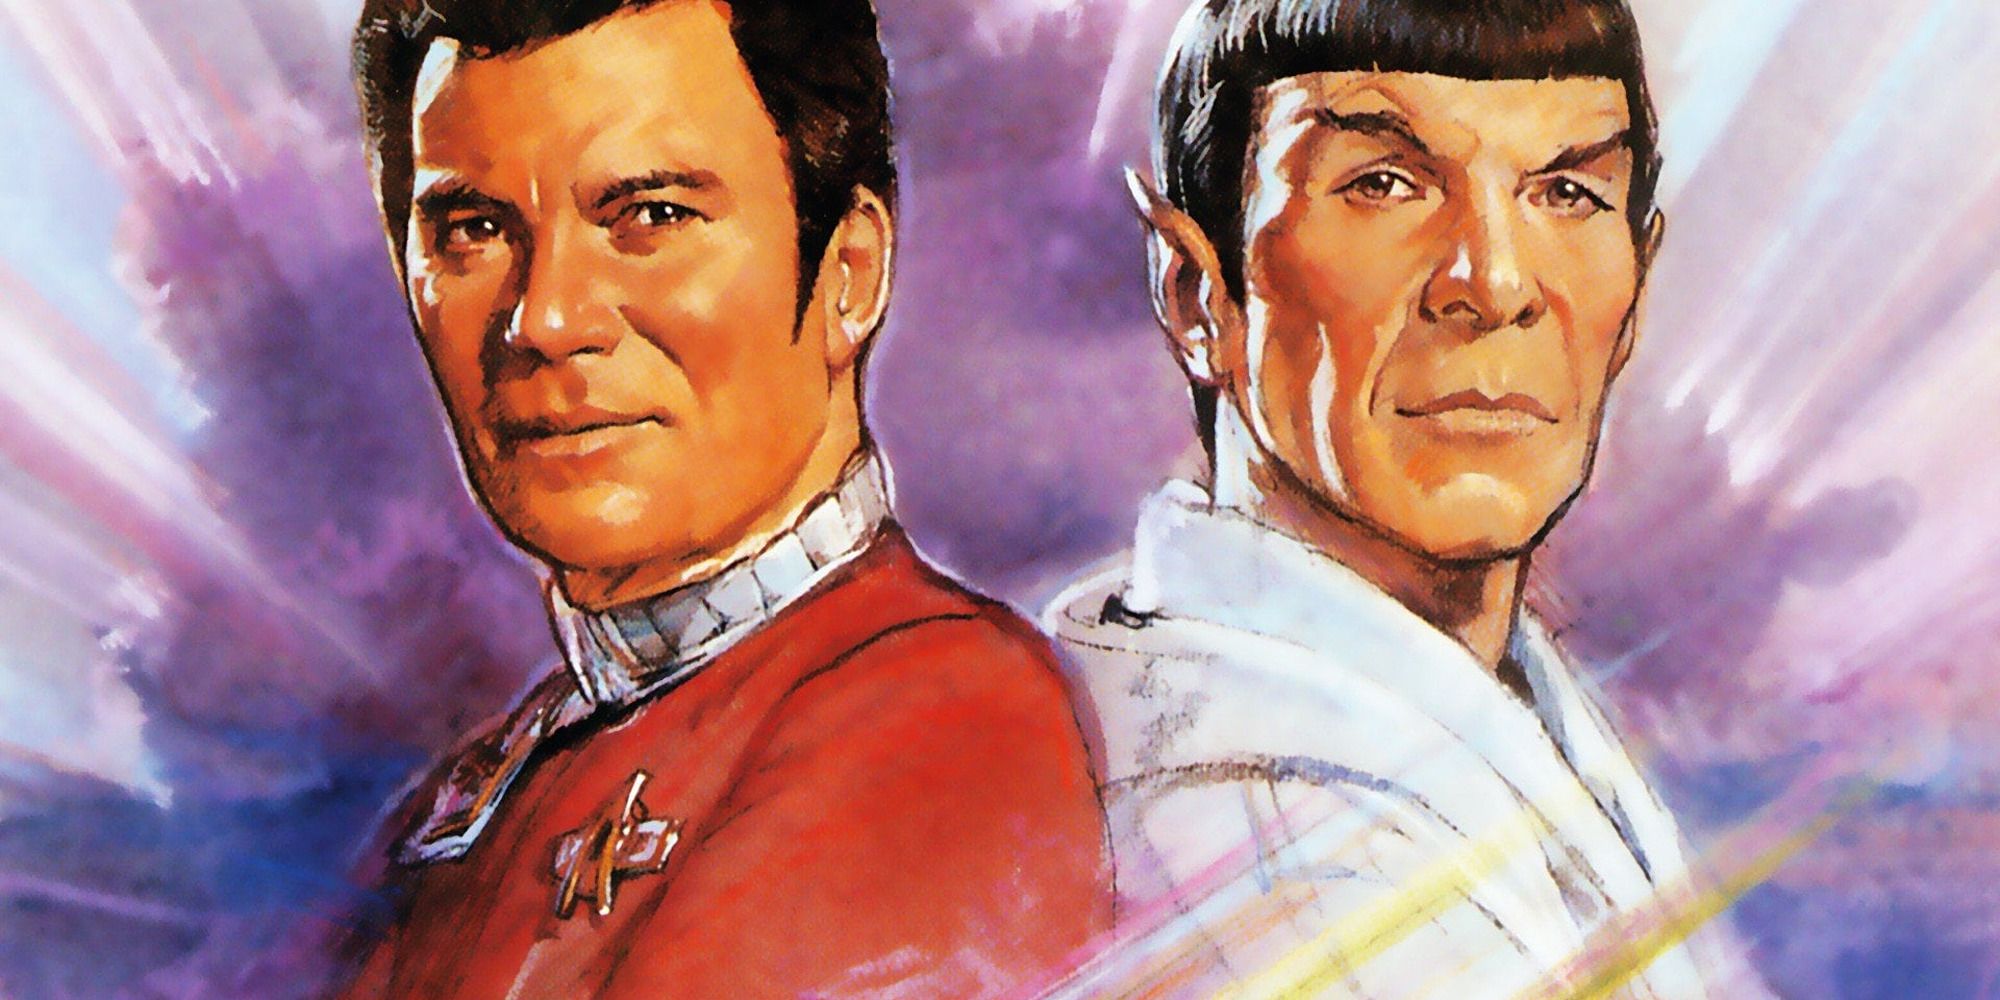 Kirk and Spock from the Star Trek IV poster